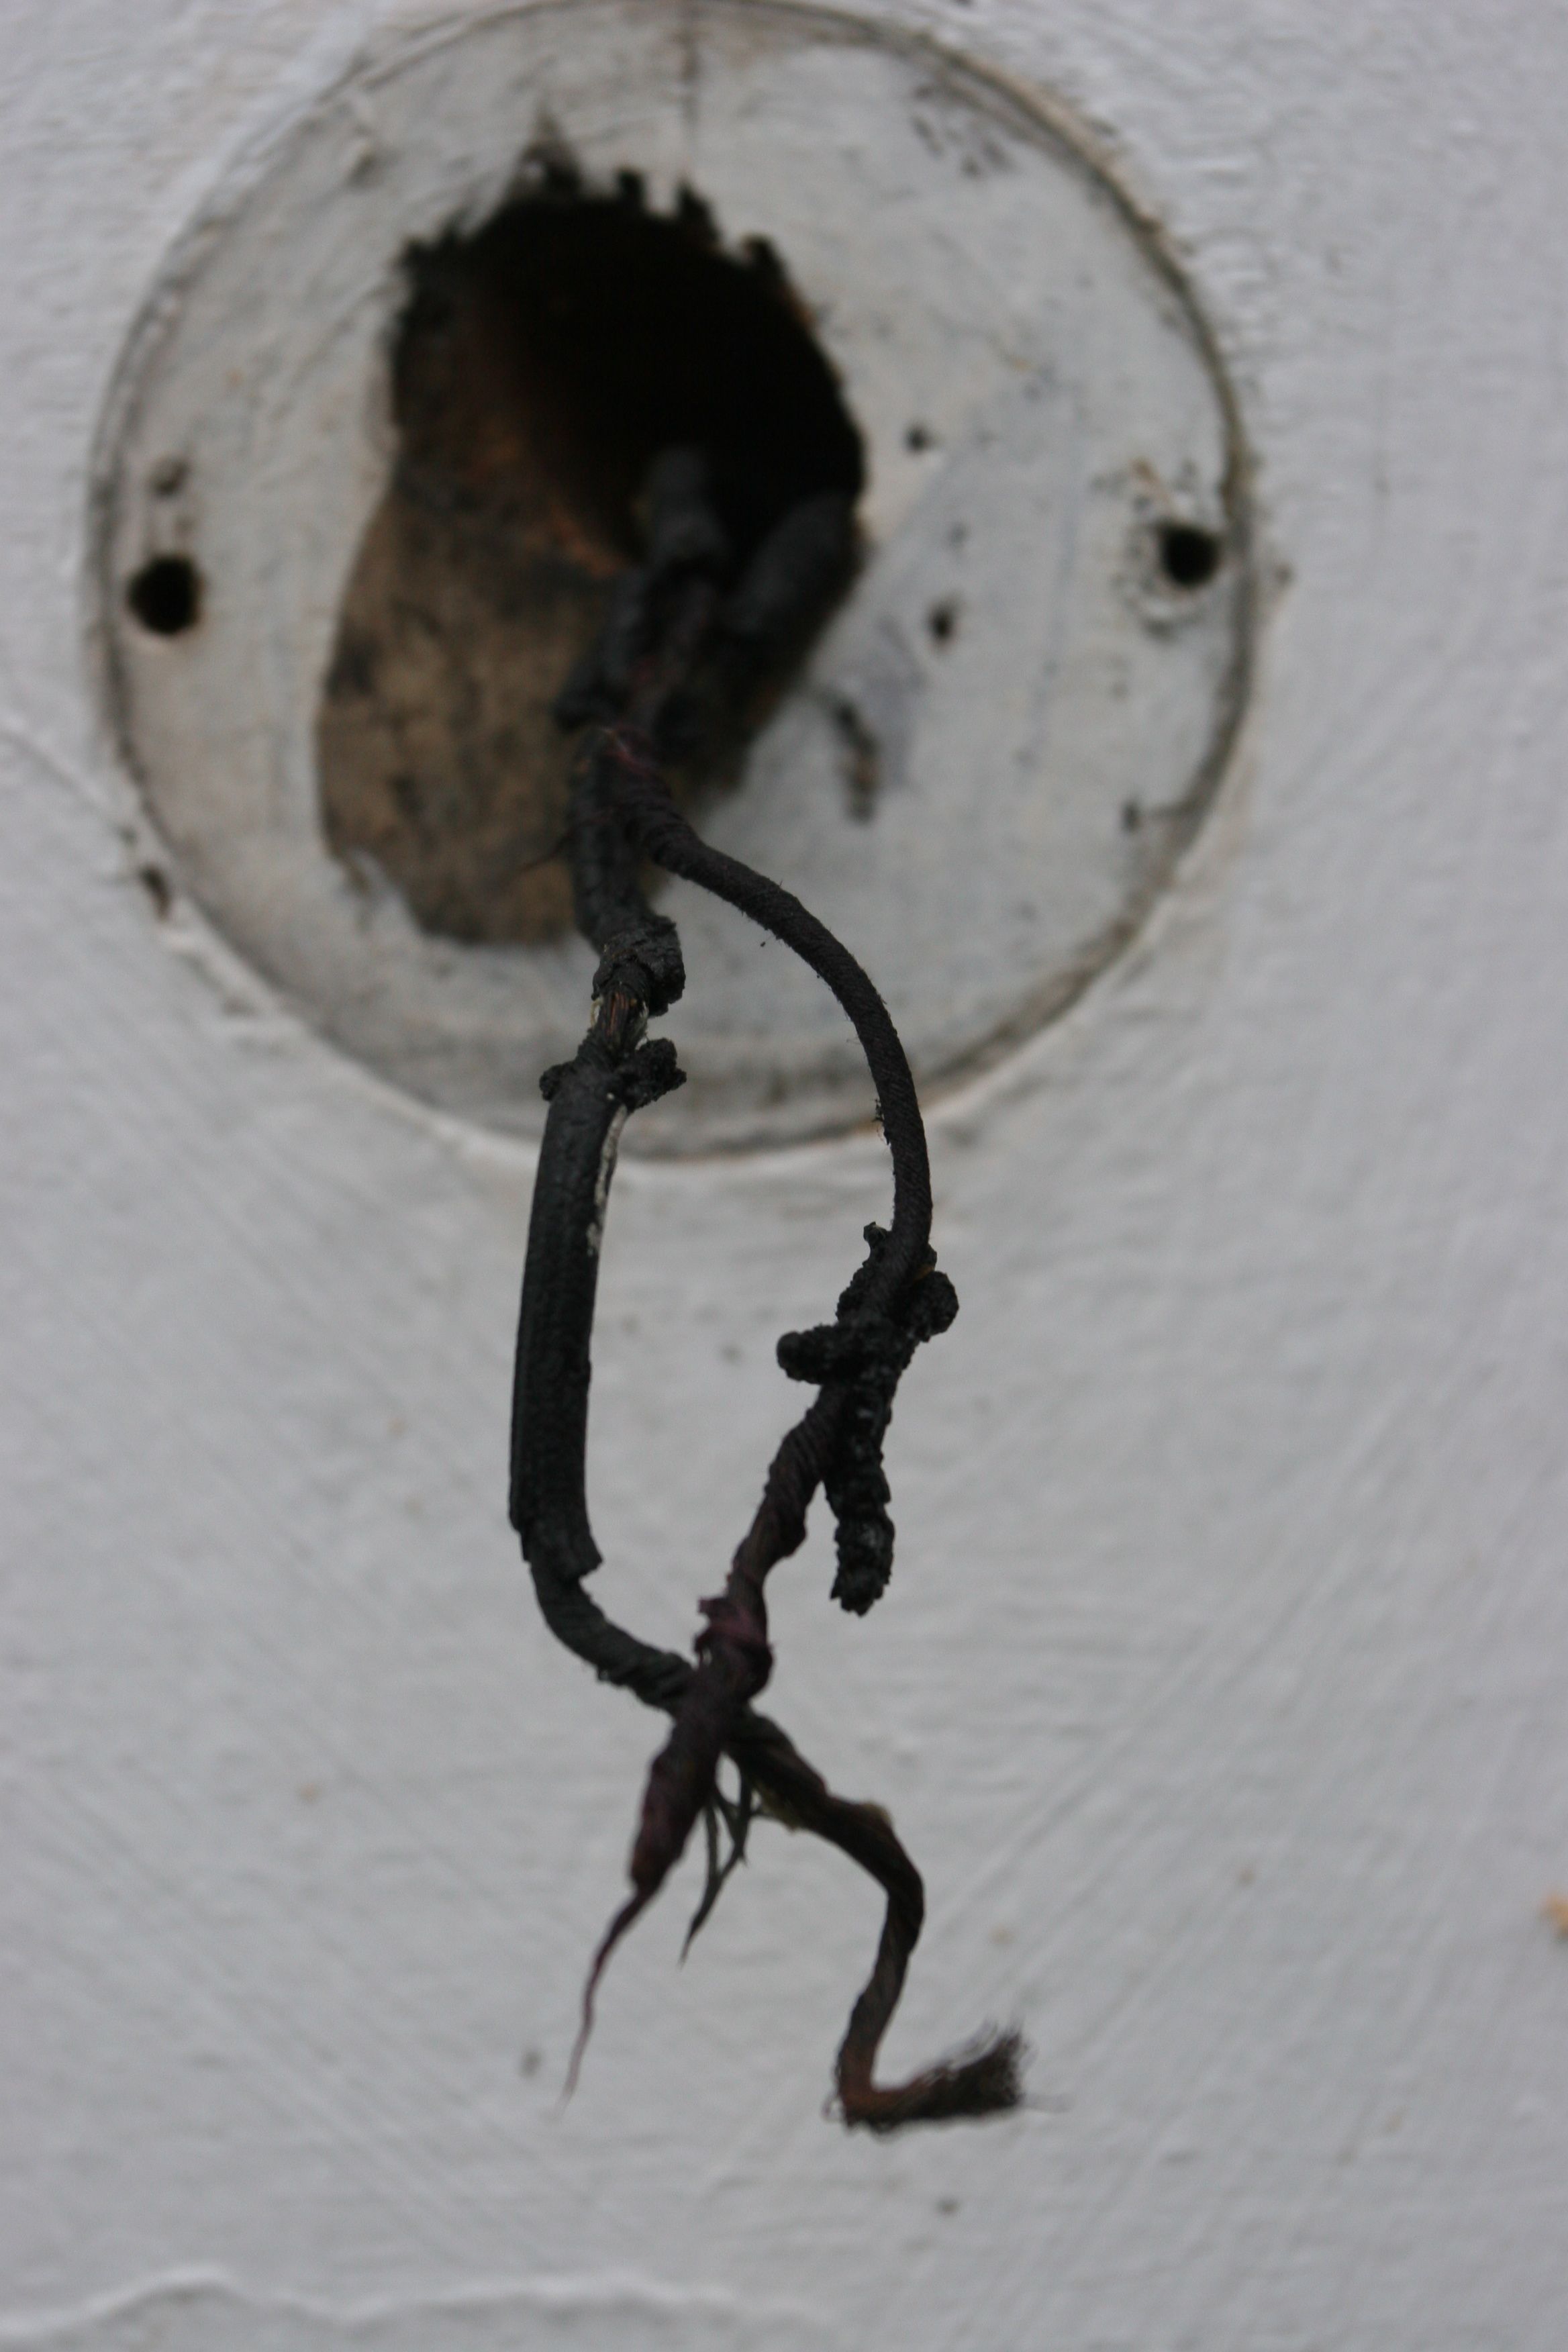 Crusty old doorbell wires. So scary and pretty at the same time.